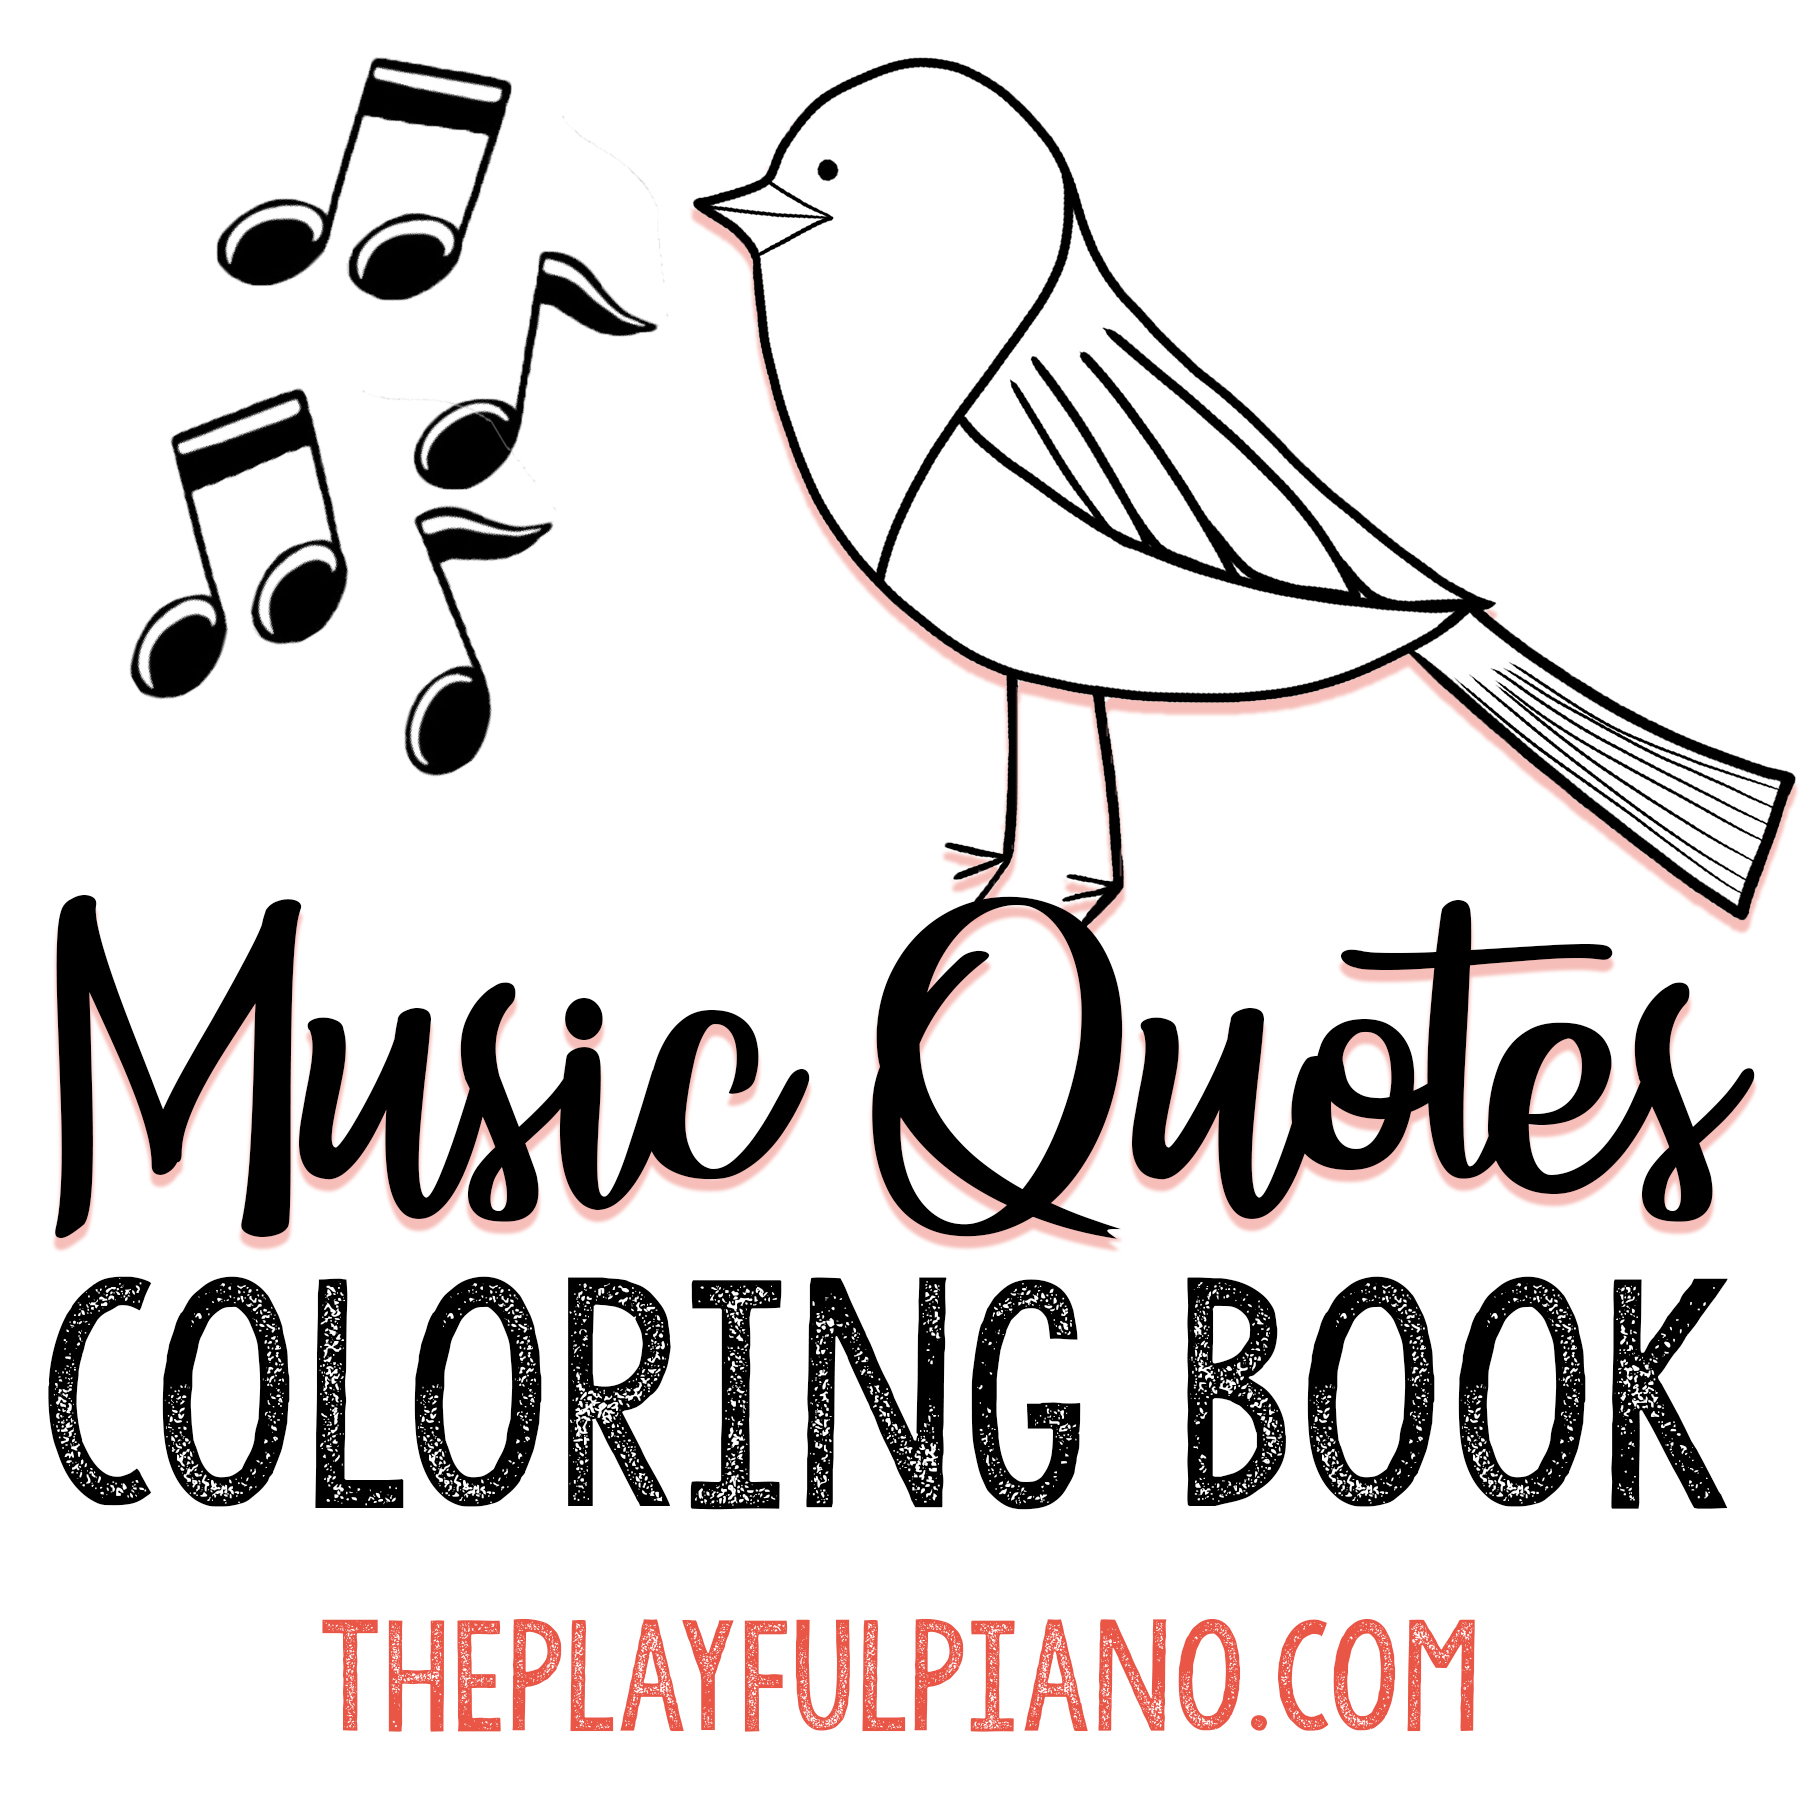 Music quotes coloring book â the playful piano